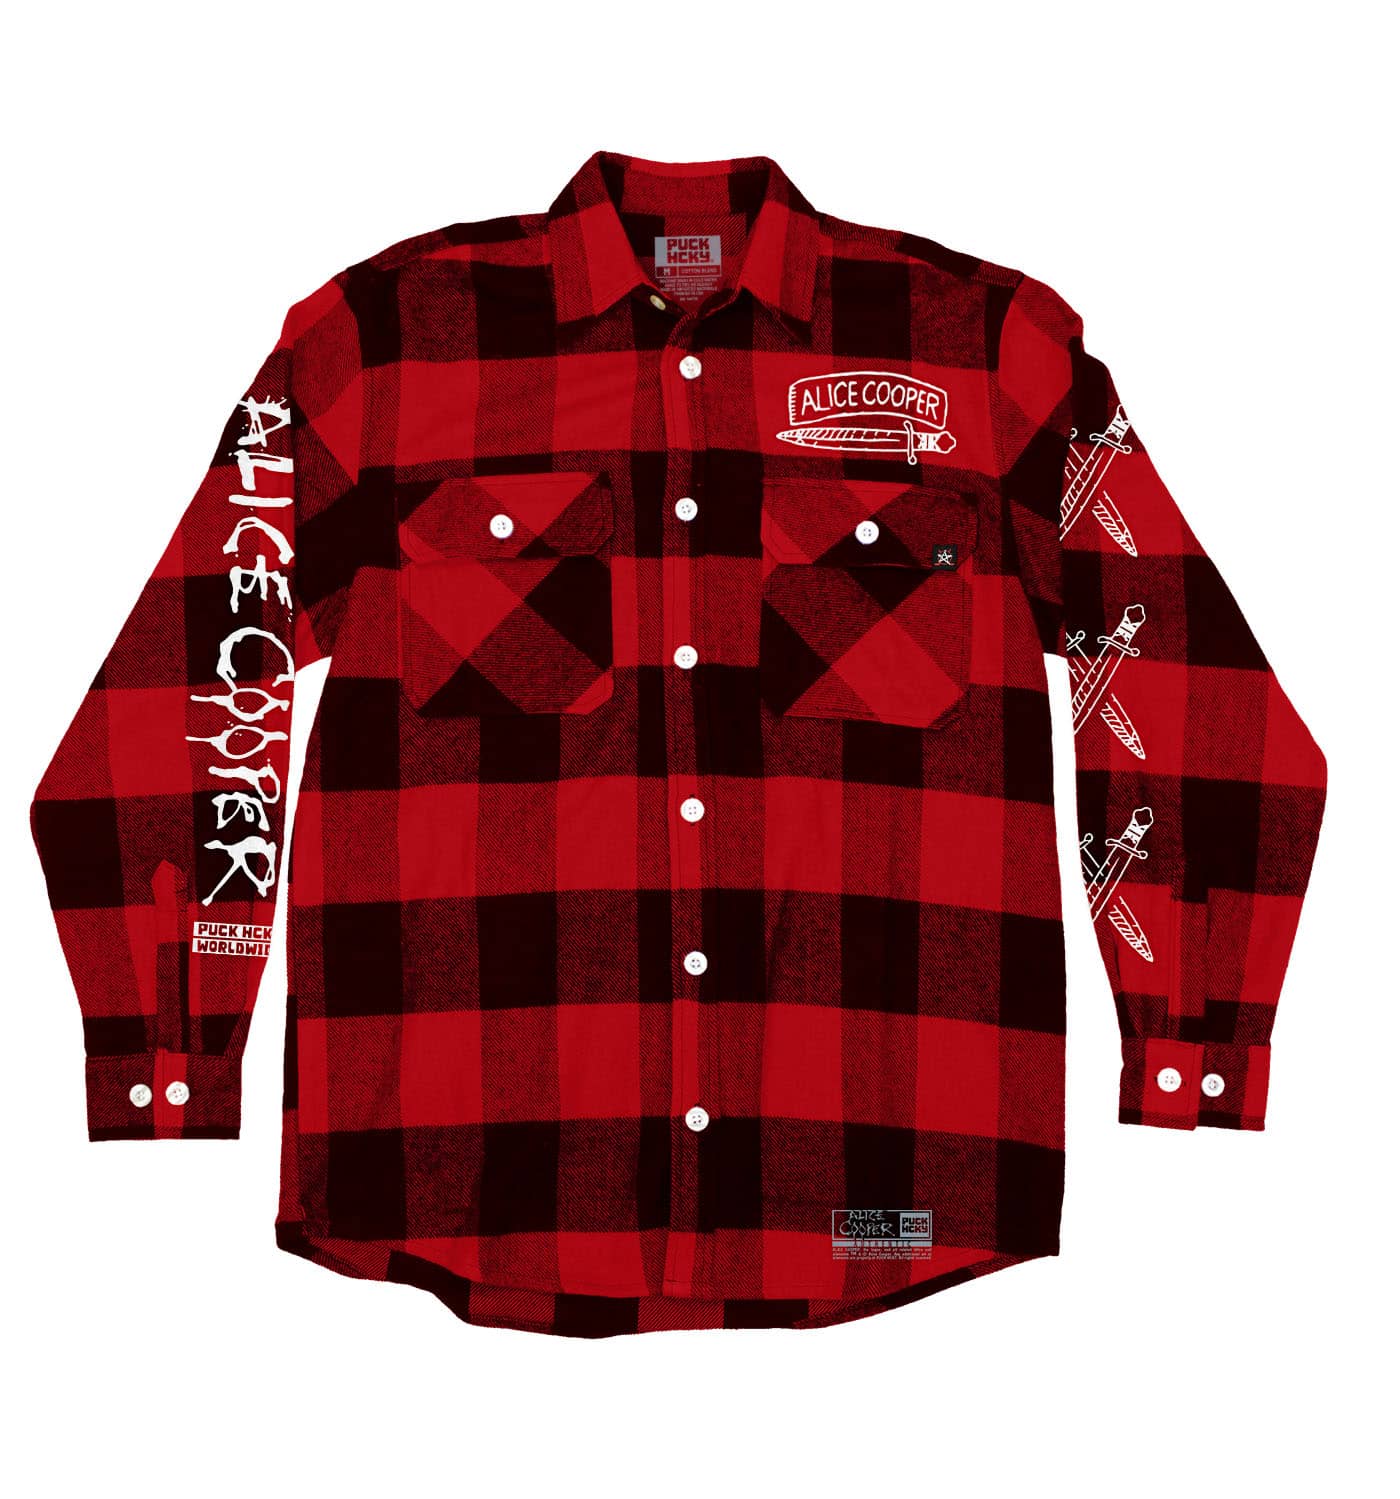 ALICE COOPER ‘SCHOOLS OUT’ hockey flannel in red plaid front view